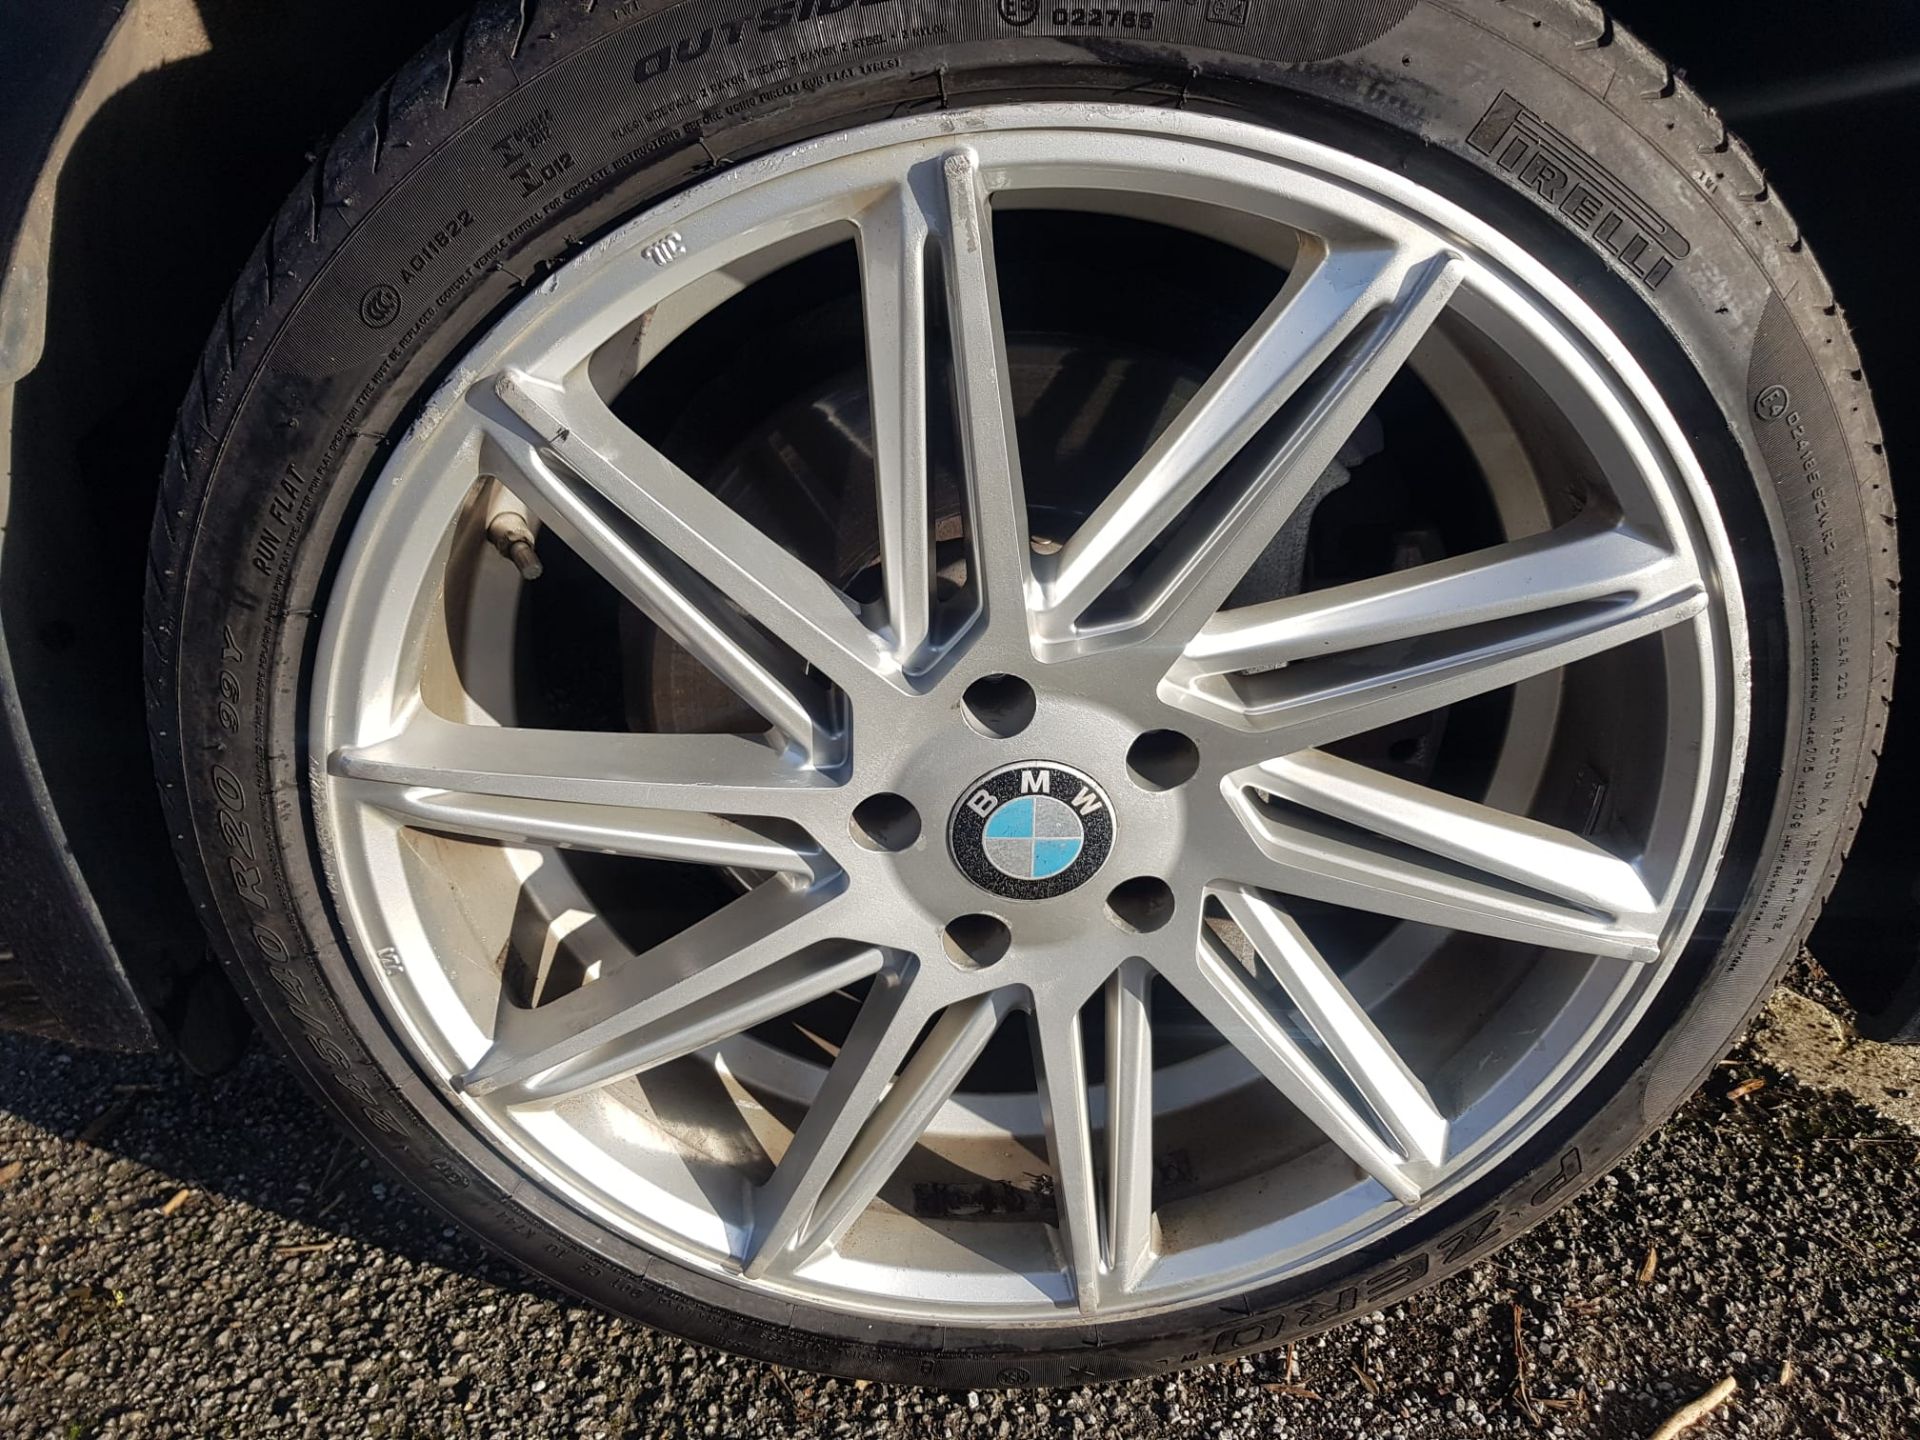 2014 730D M-SPORT SALOON - FULL SERVICE HISTORY - 115K MILES - Image 18 of 43